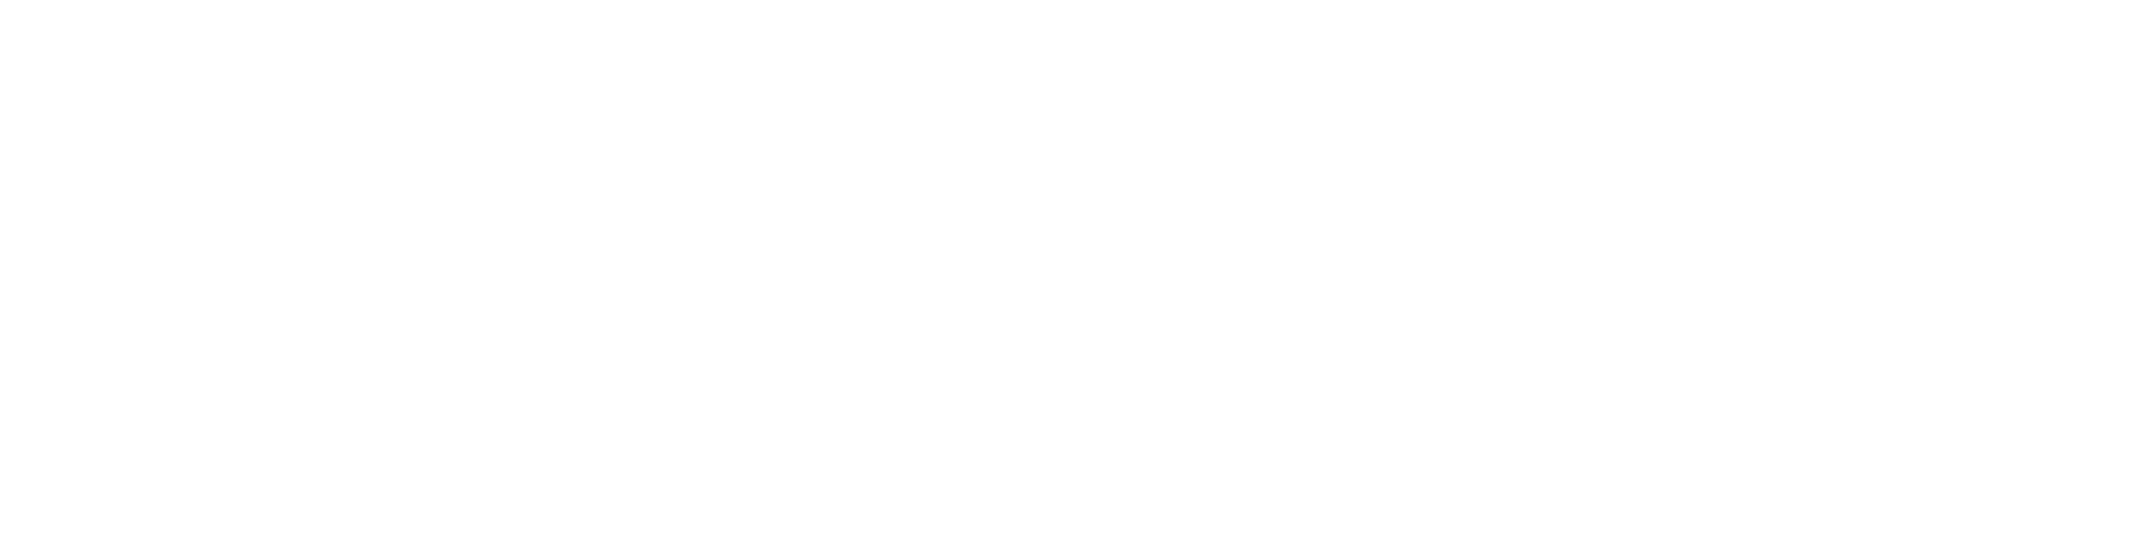 IndyRoofC logo white-2